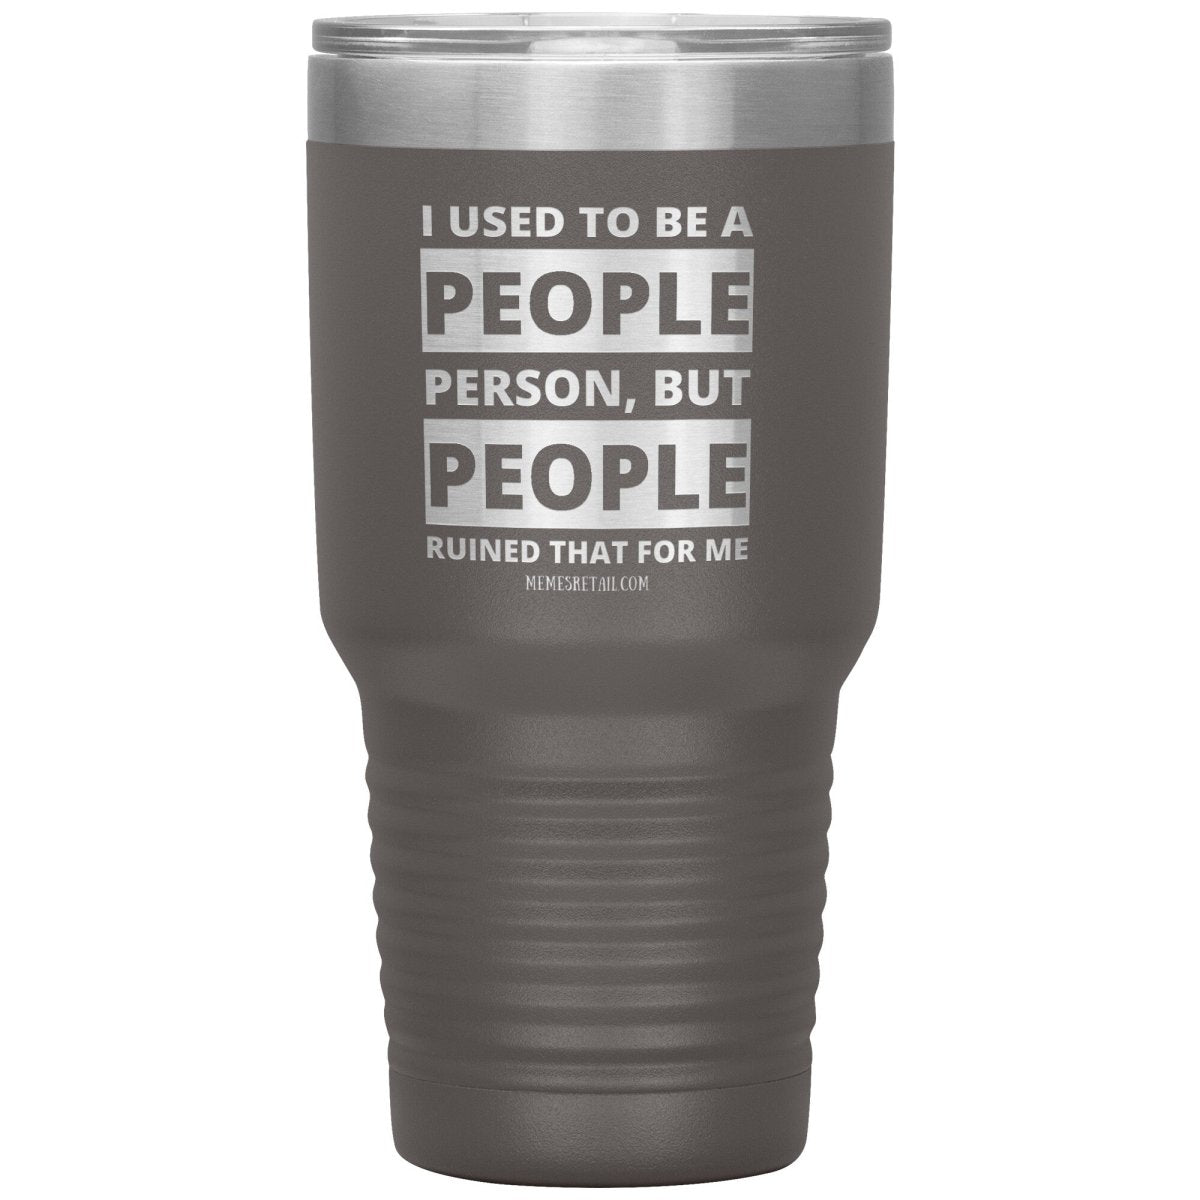 I Used To Be A People Person, But People Ruined That For Me Tumblers, 30oz Insulated Tumbler / Pewter - MemesRetail.com